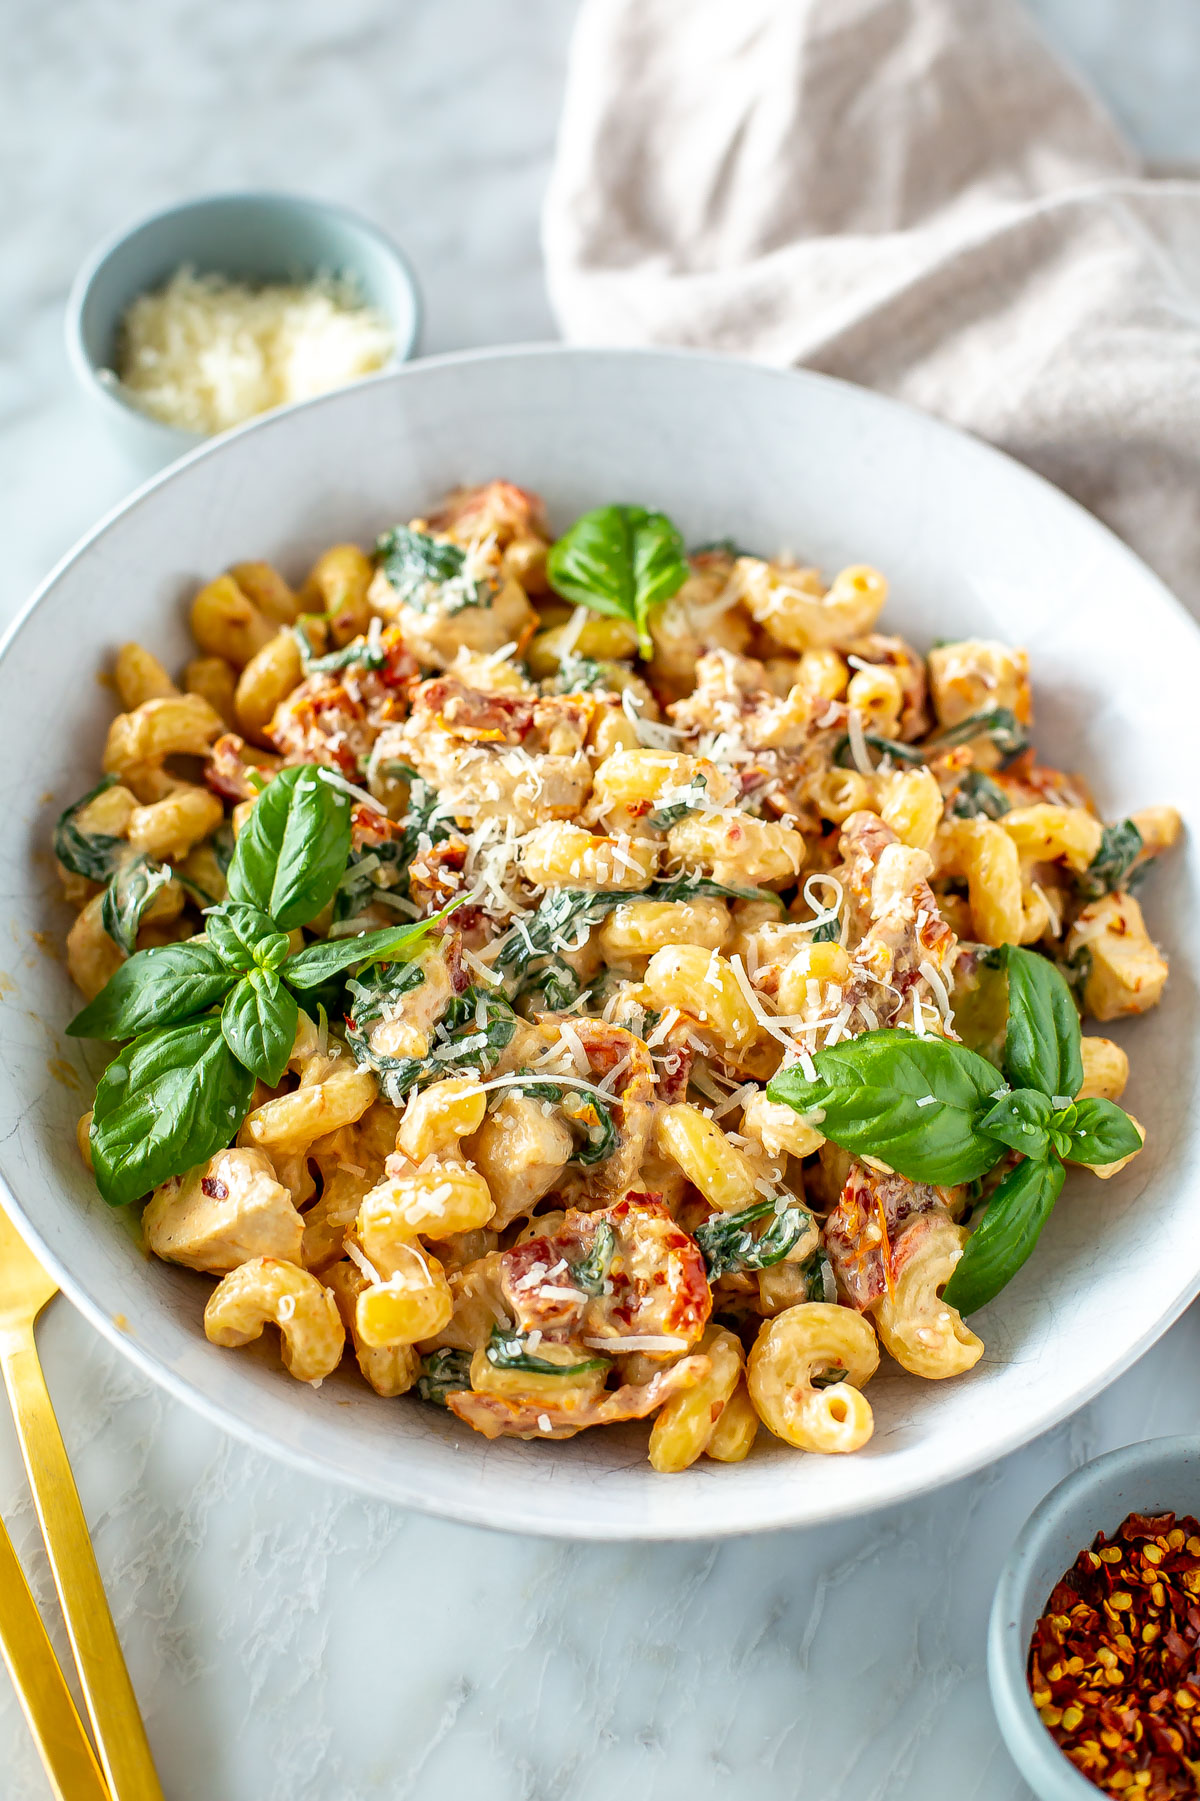 A bowl of creamy sundried tomato pasta with parmesan and red chili flakes on top.